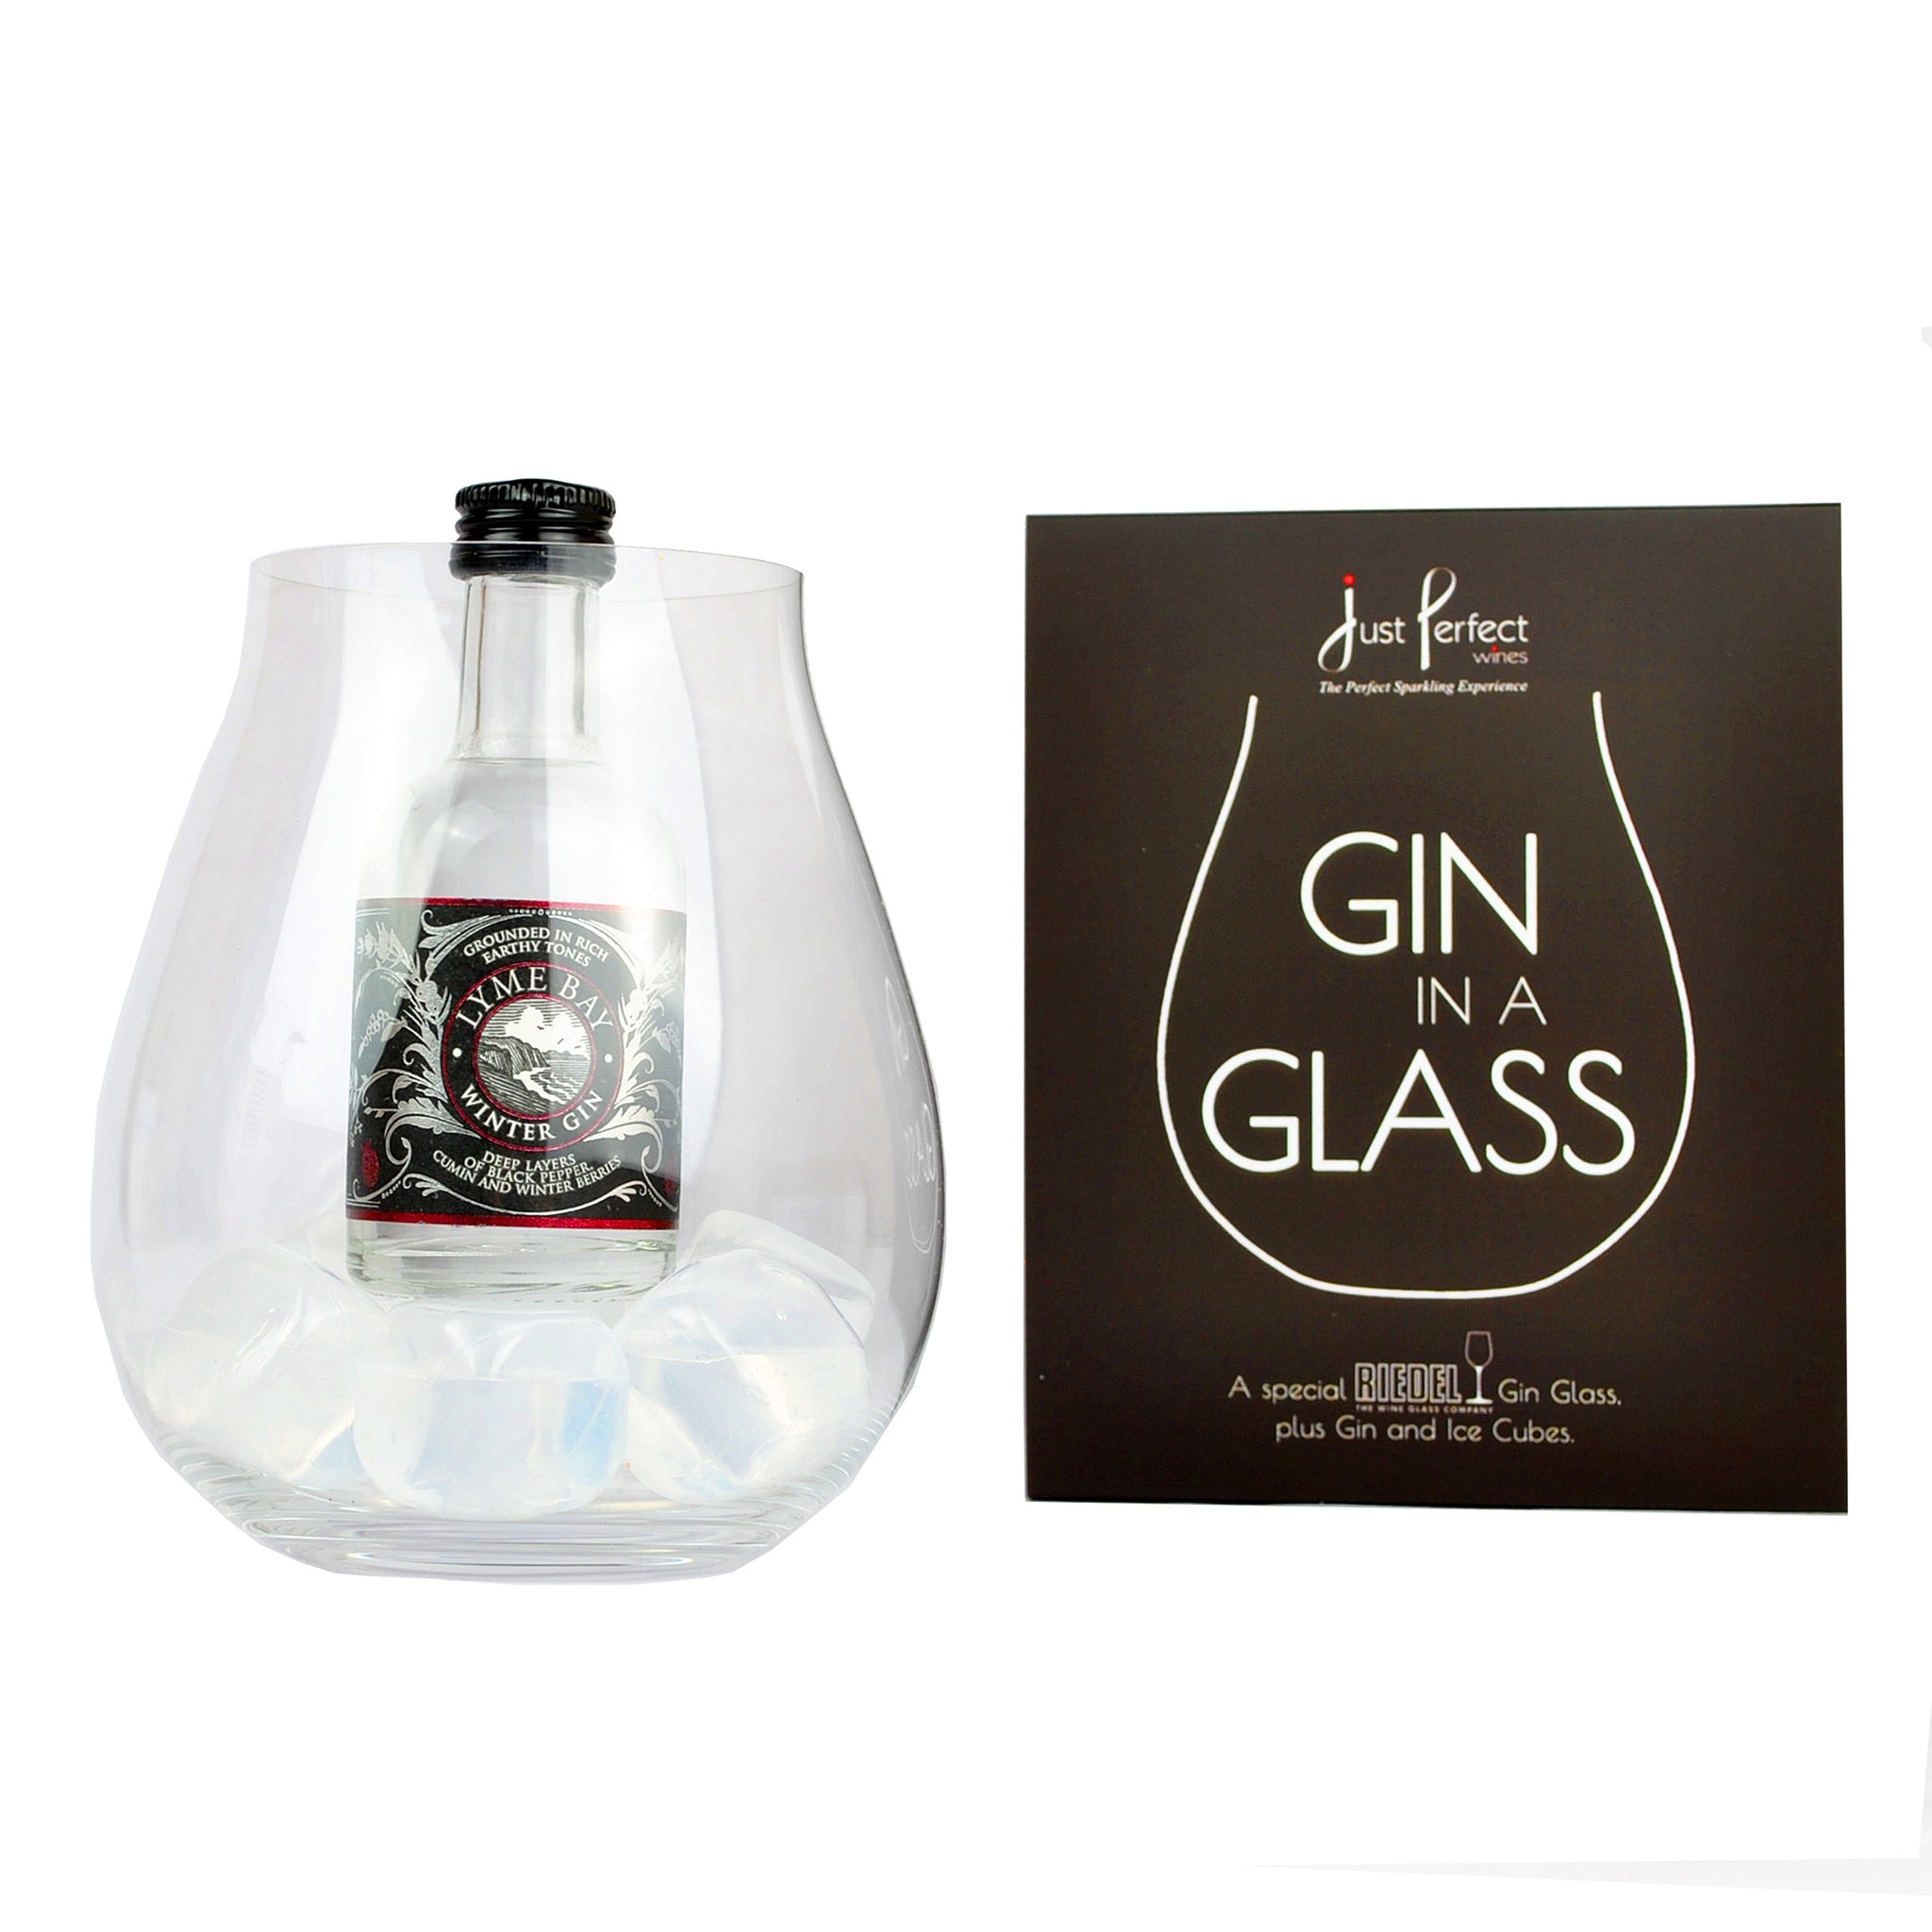 GIN IN A GLASS gift set with a Riedel Gin Glass and Lyme Bay Winter Gin 